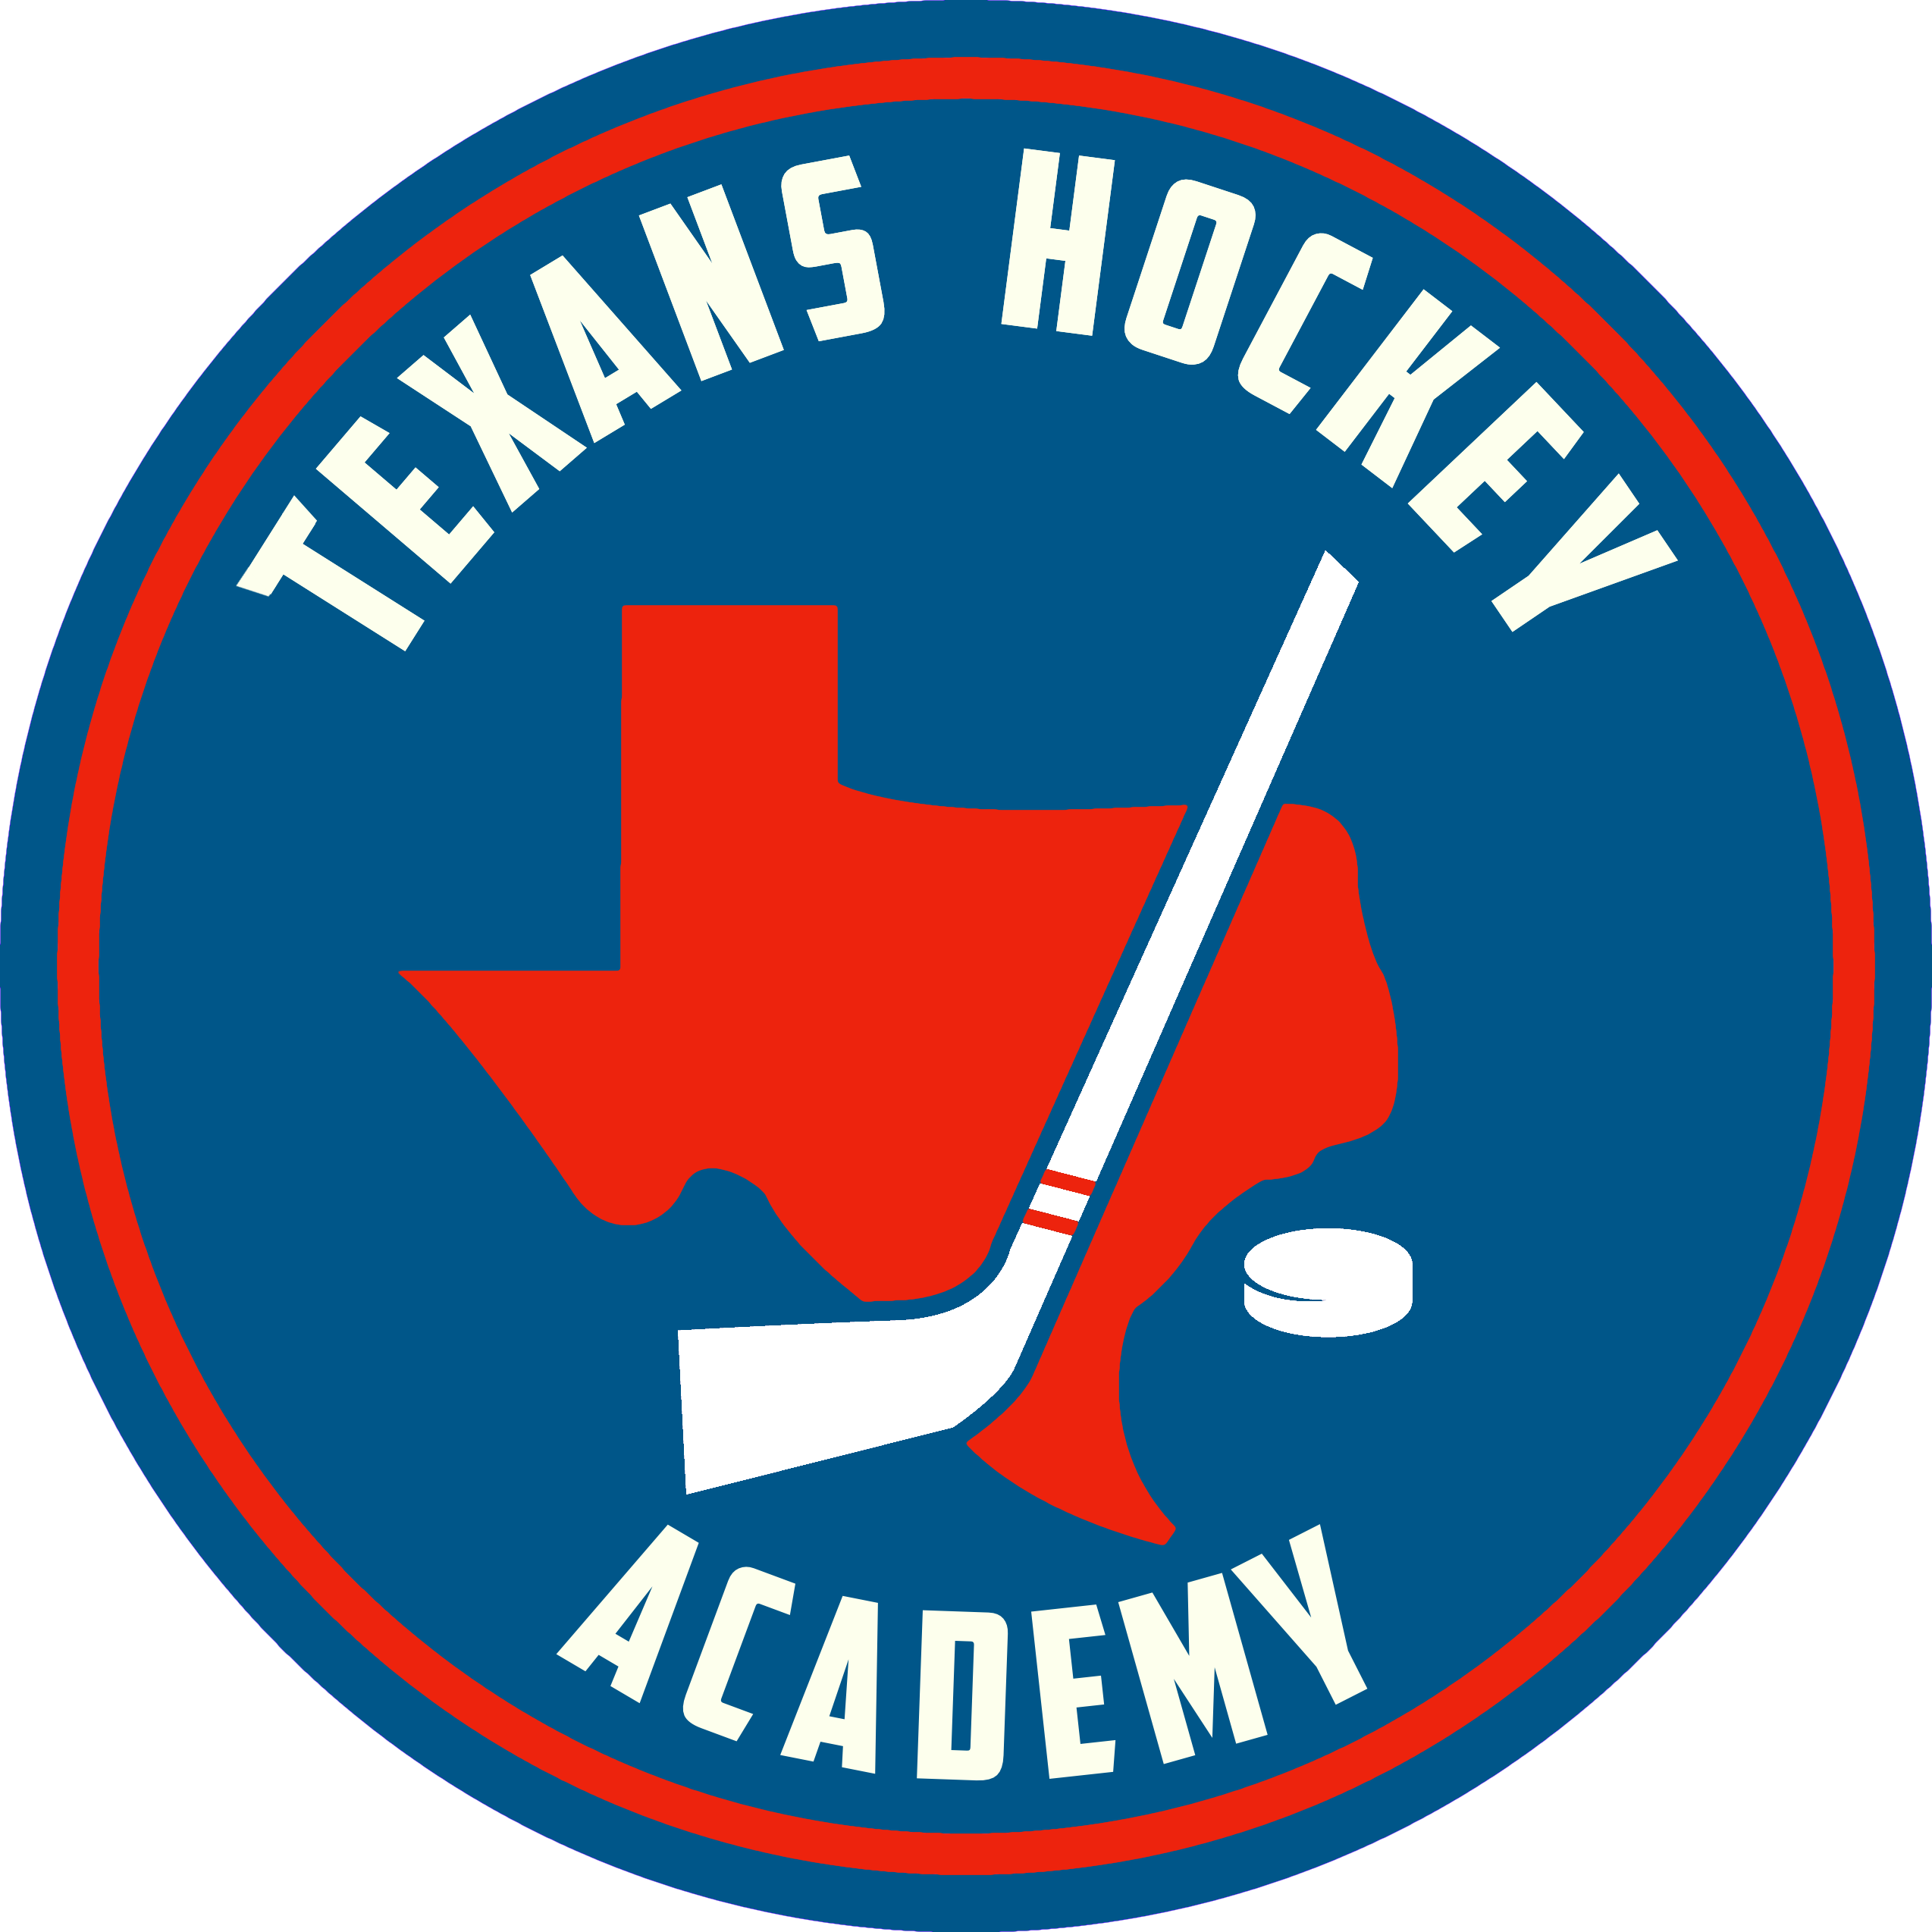 OFFICIAL HOME OF TEXANS HOCKEY